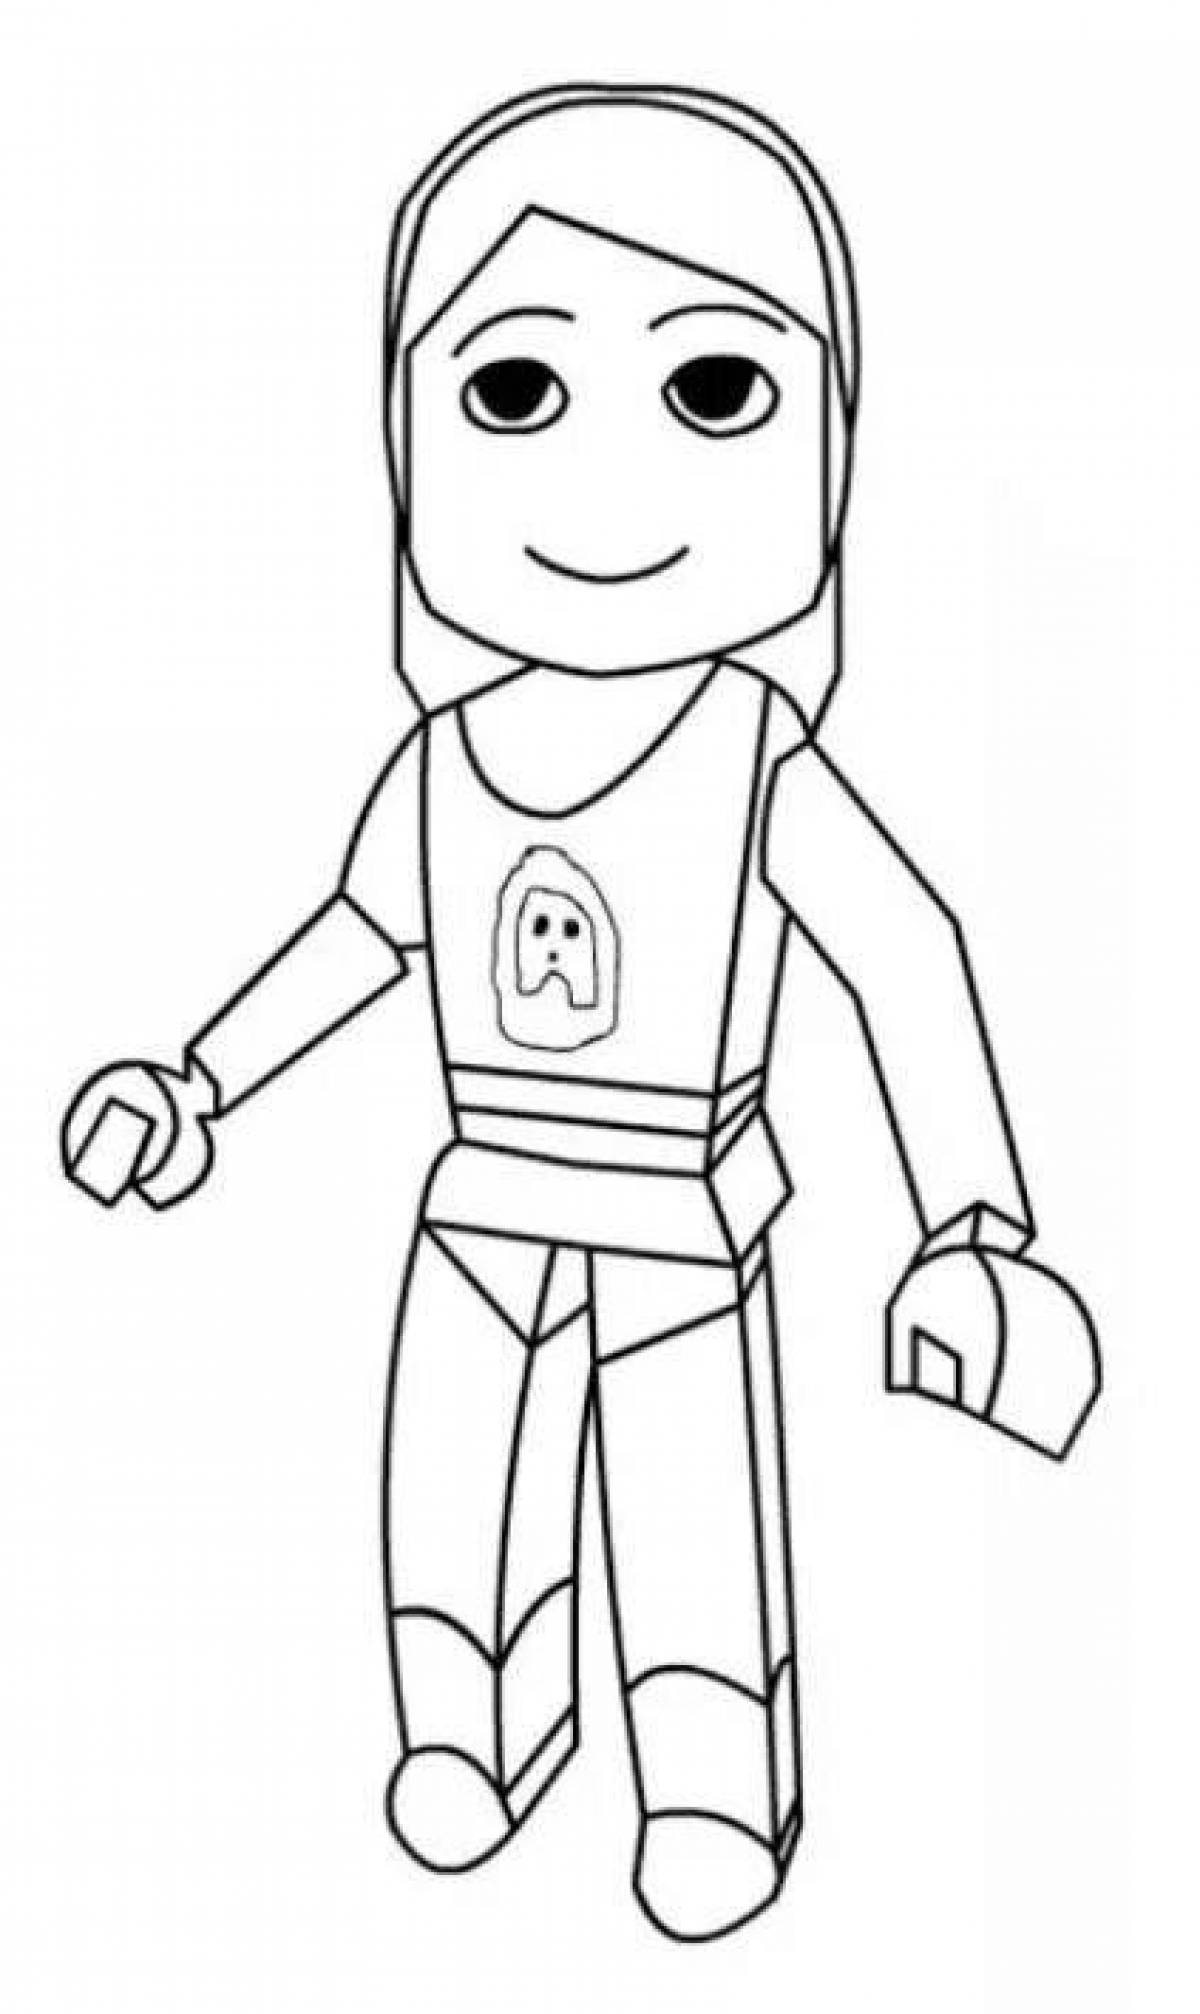 Playful roblox man coloring page